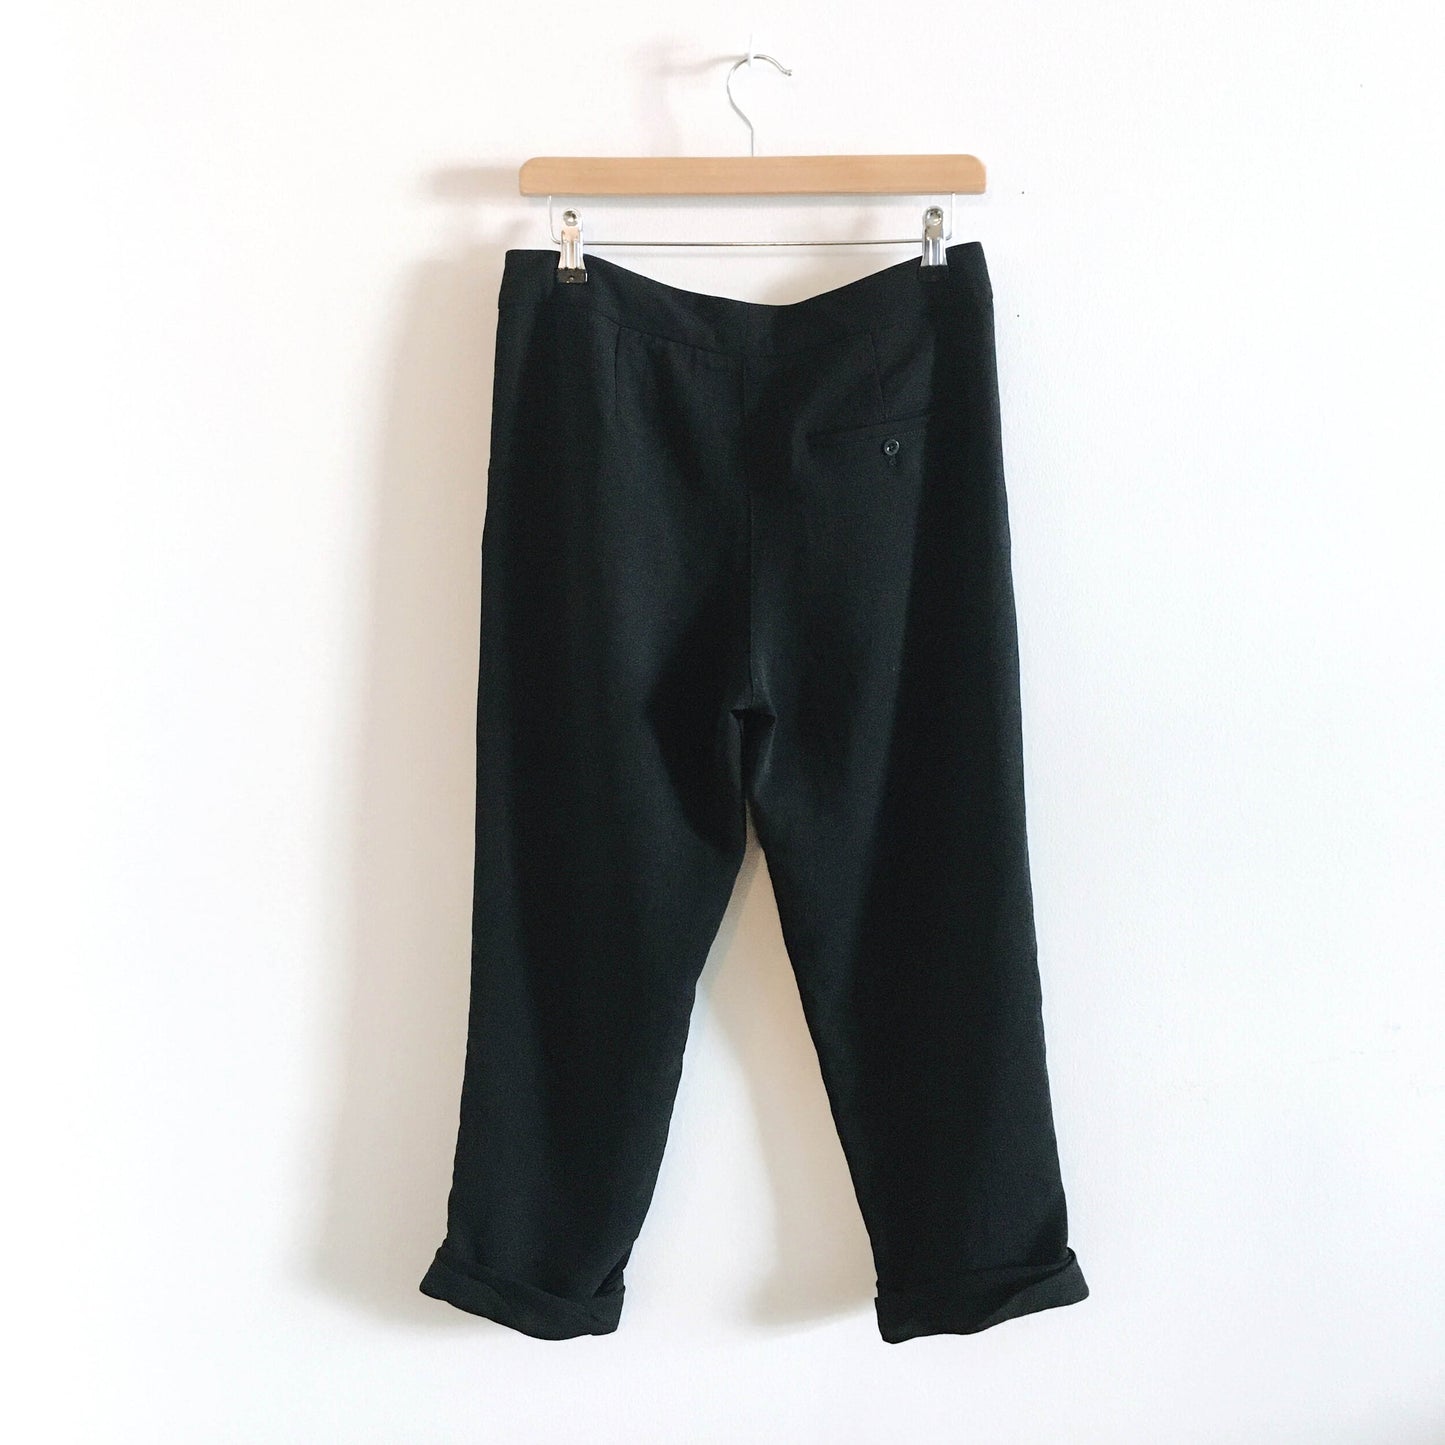 Wilfred Allant Cropped Trouser - size 4